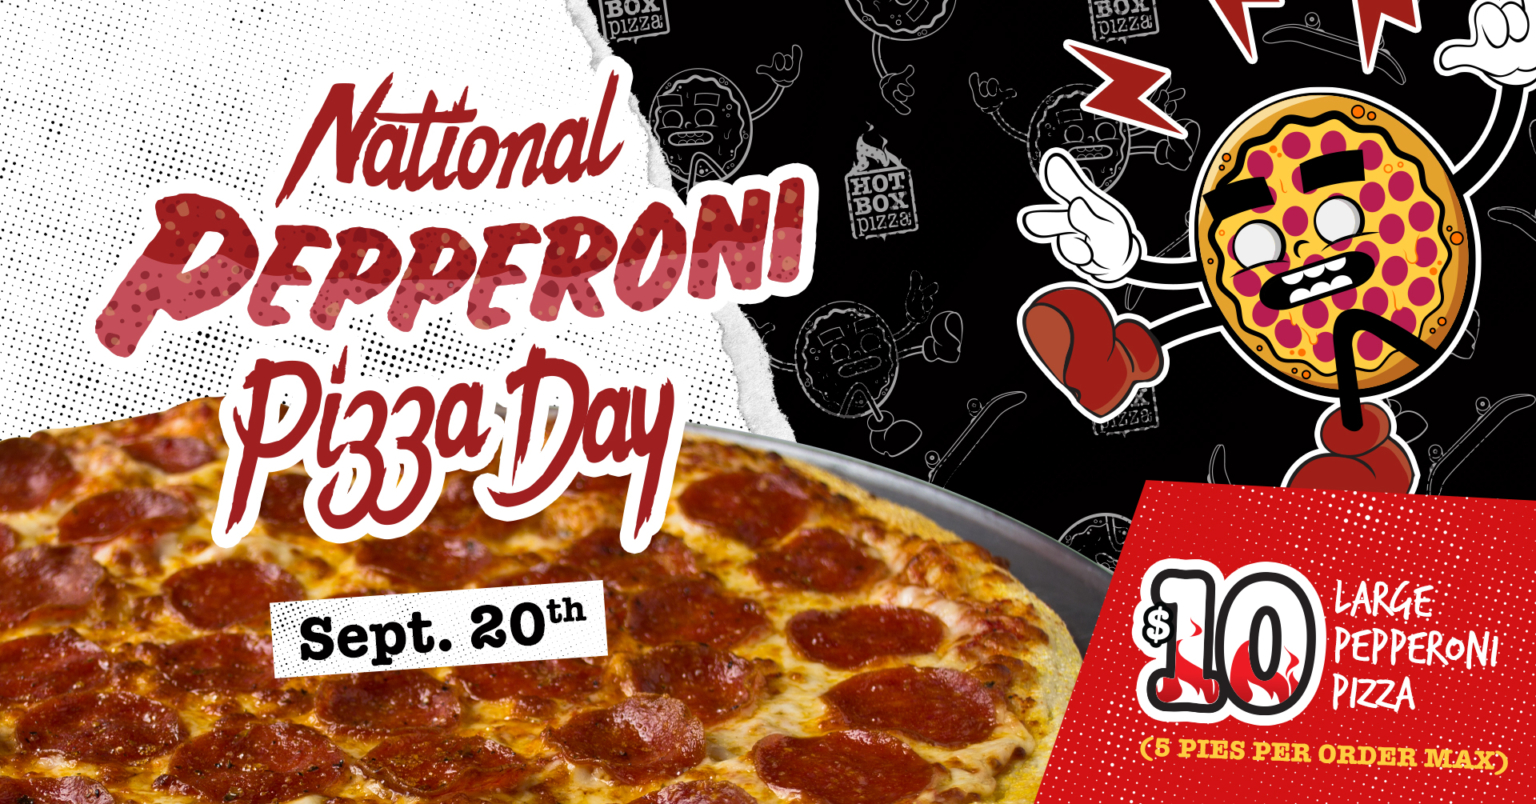 Get Ready National Pizza Days HotBox Pizza